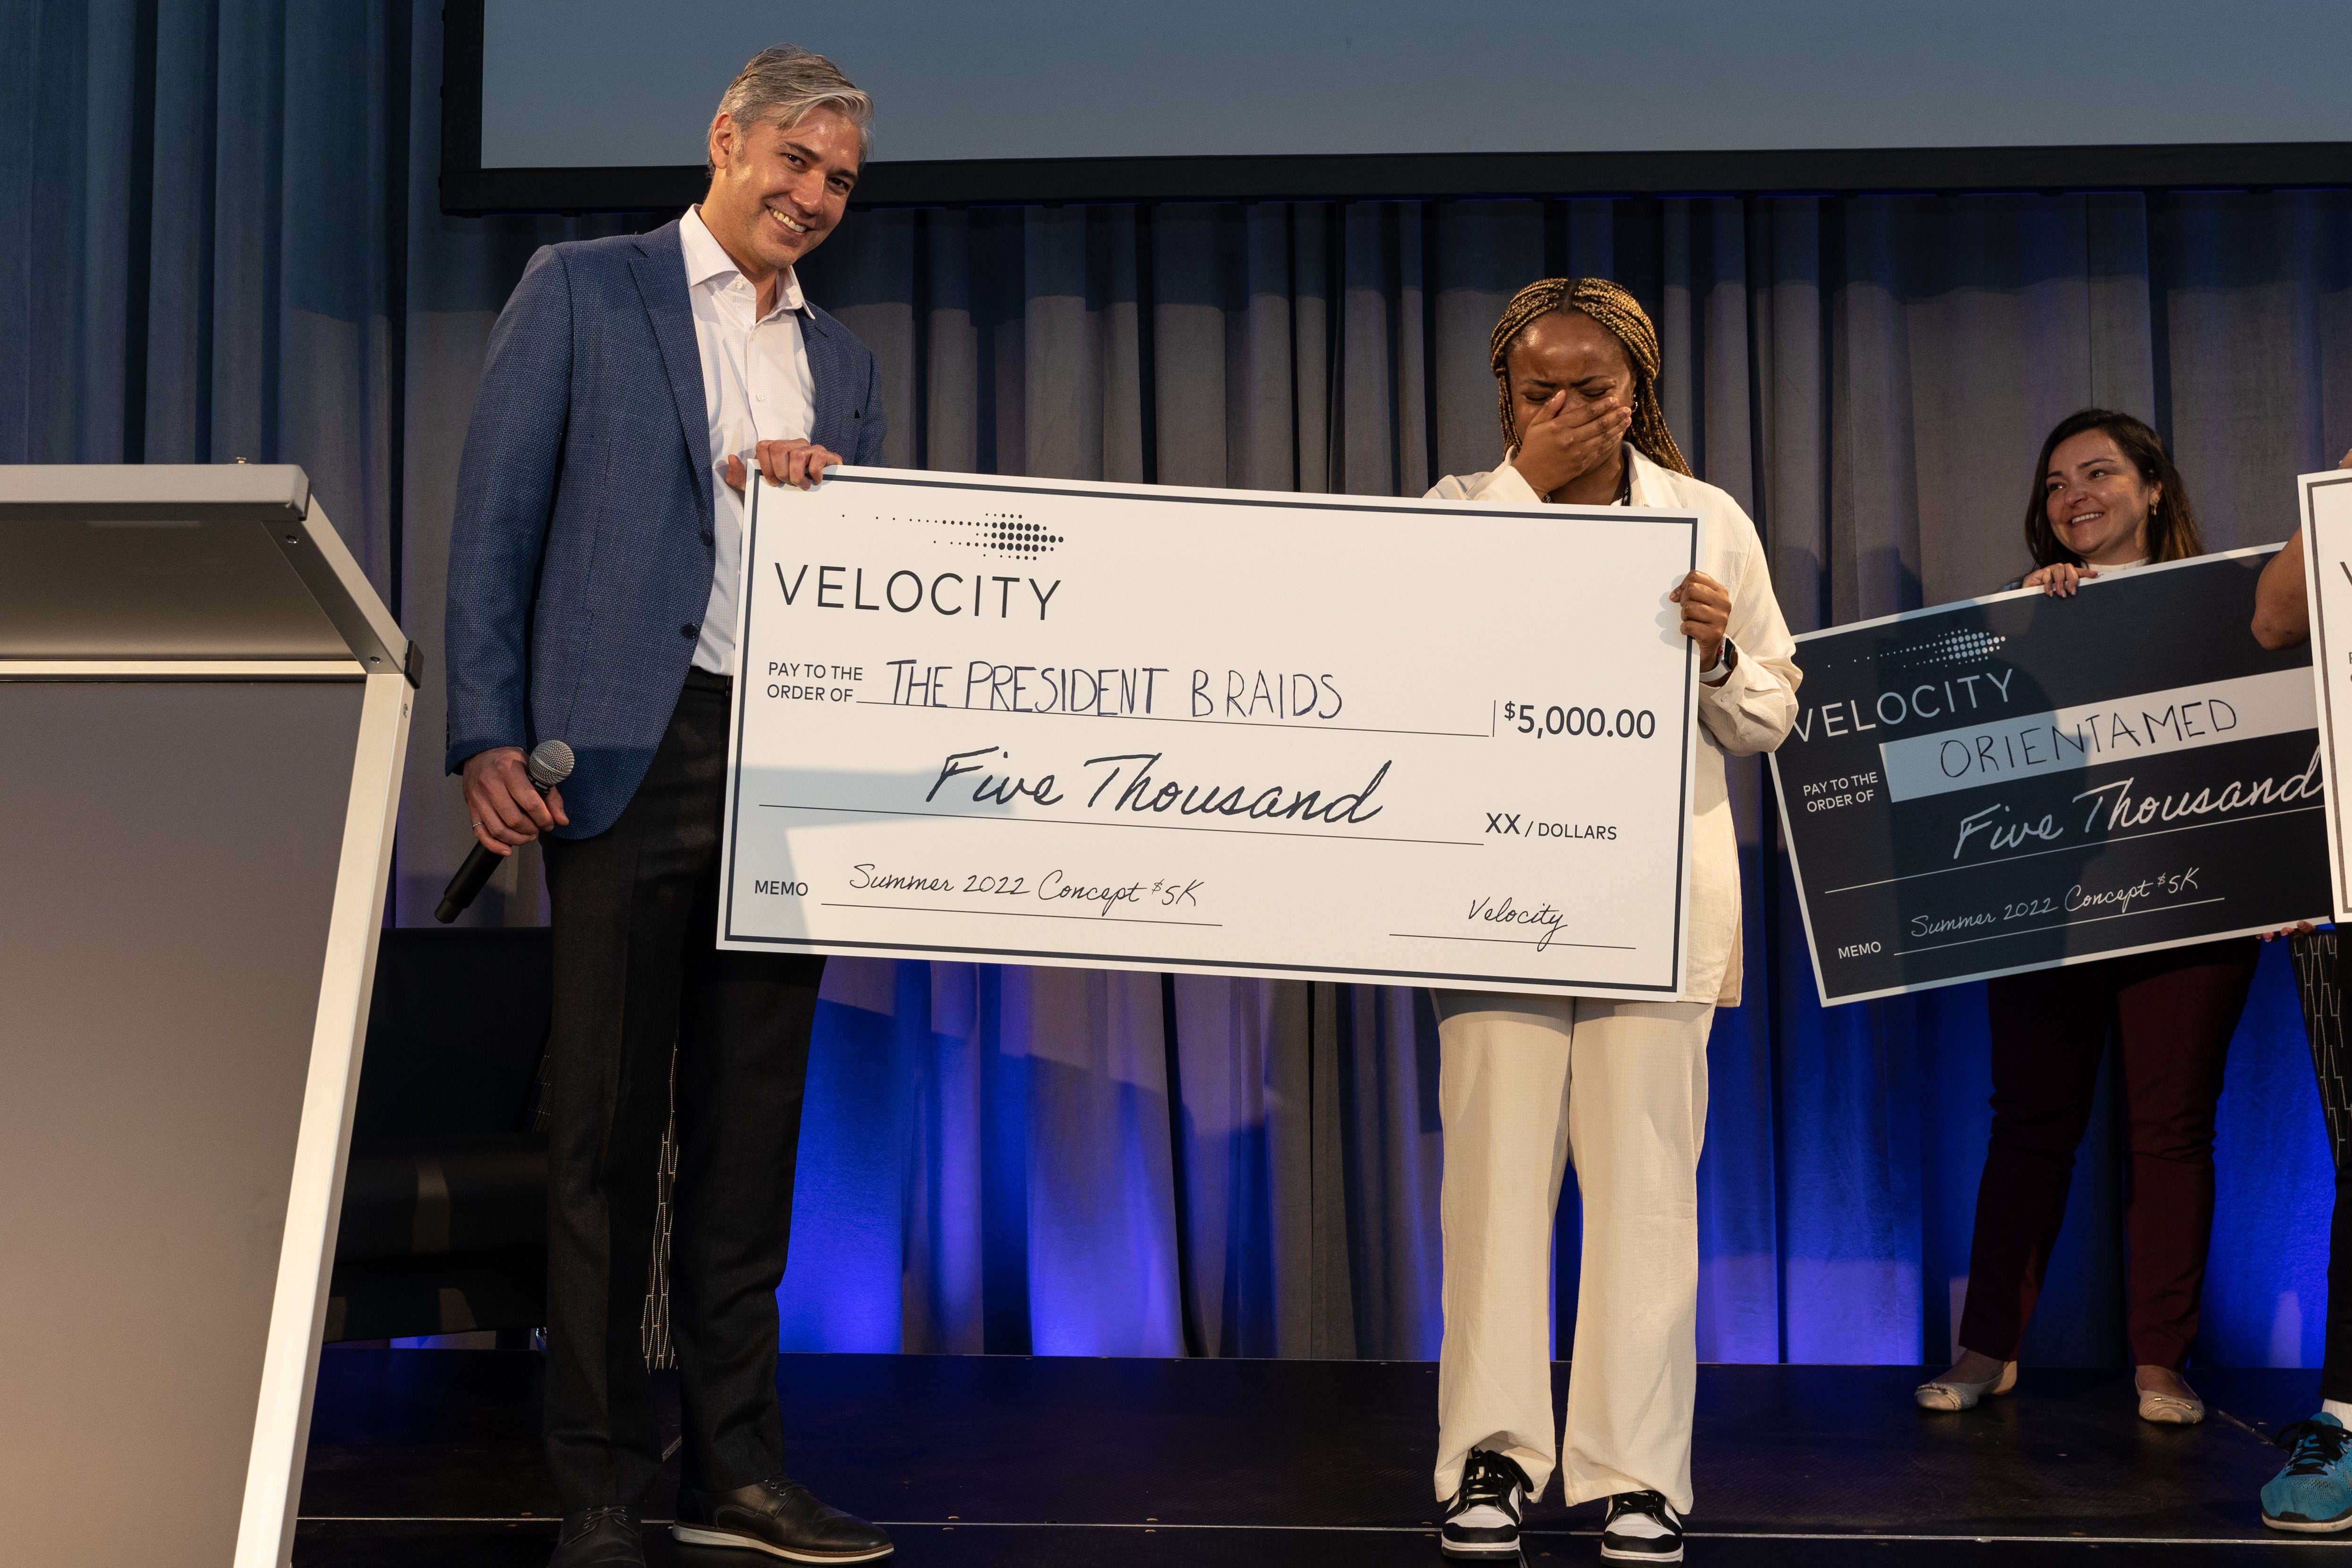 The President Braids company receives a large cheque from Velocity for the Summer 2022 Concept 5K.